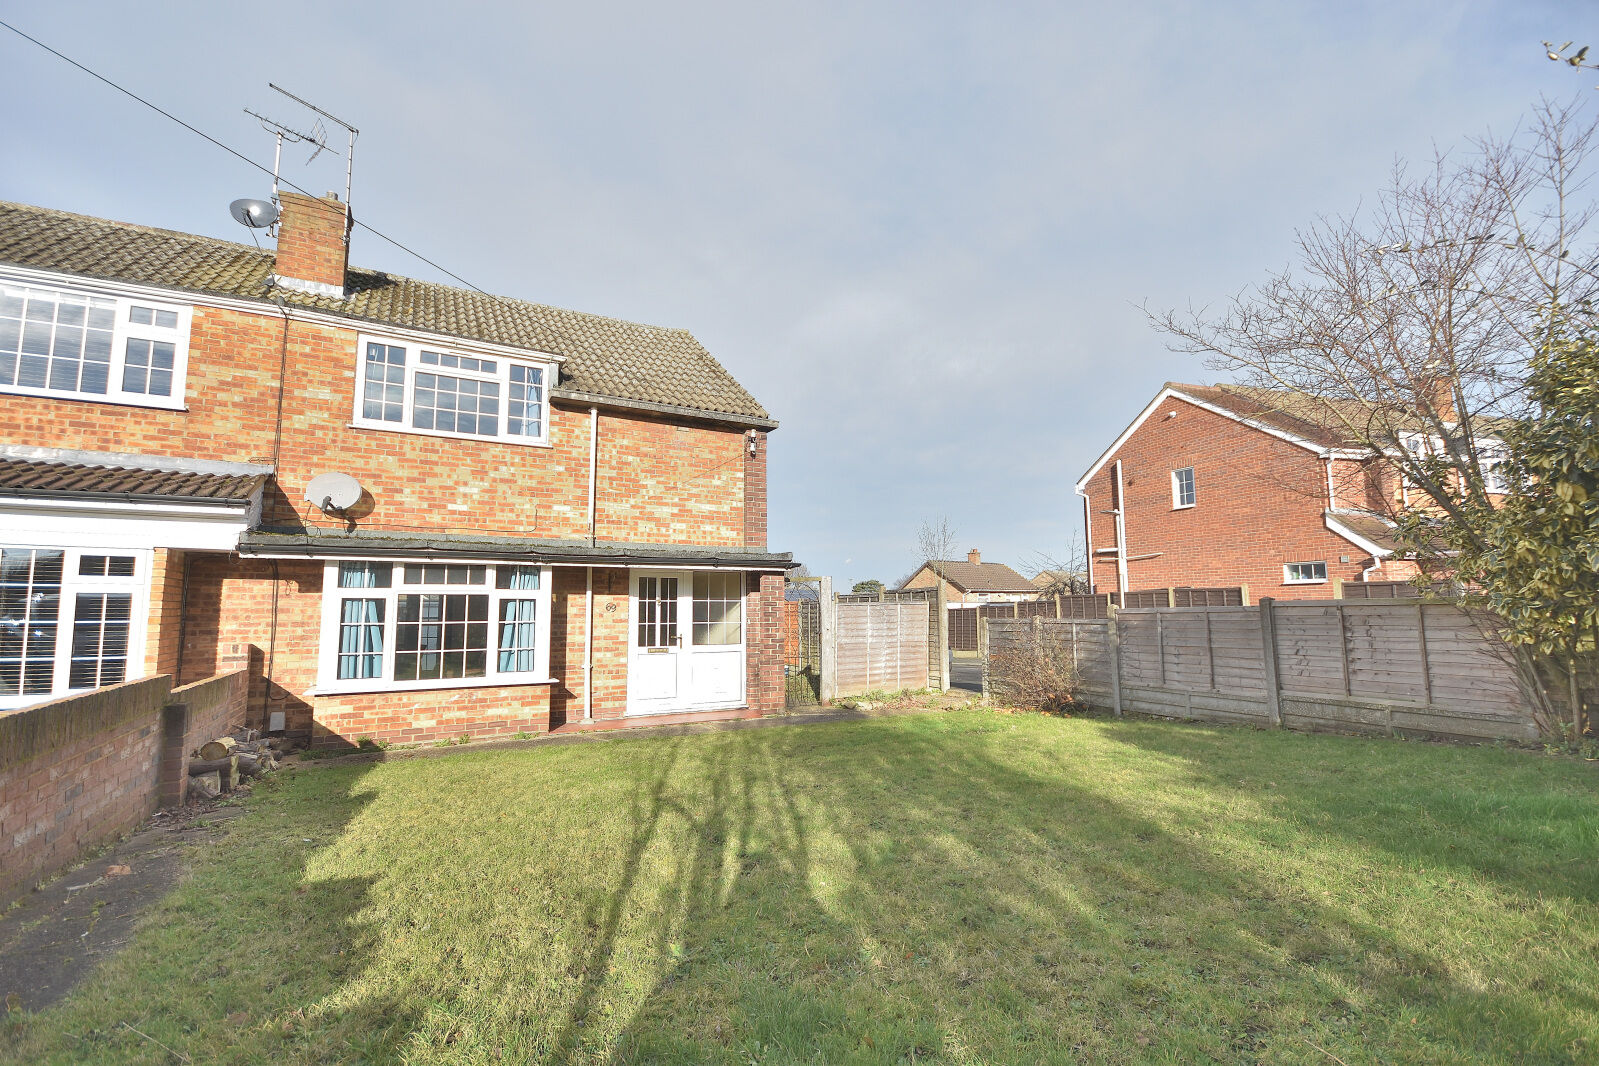 3 bedroom  house to rent, Available now Heath Row, Bishops Stortford, CM23, main image